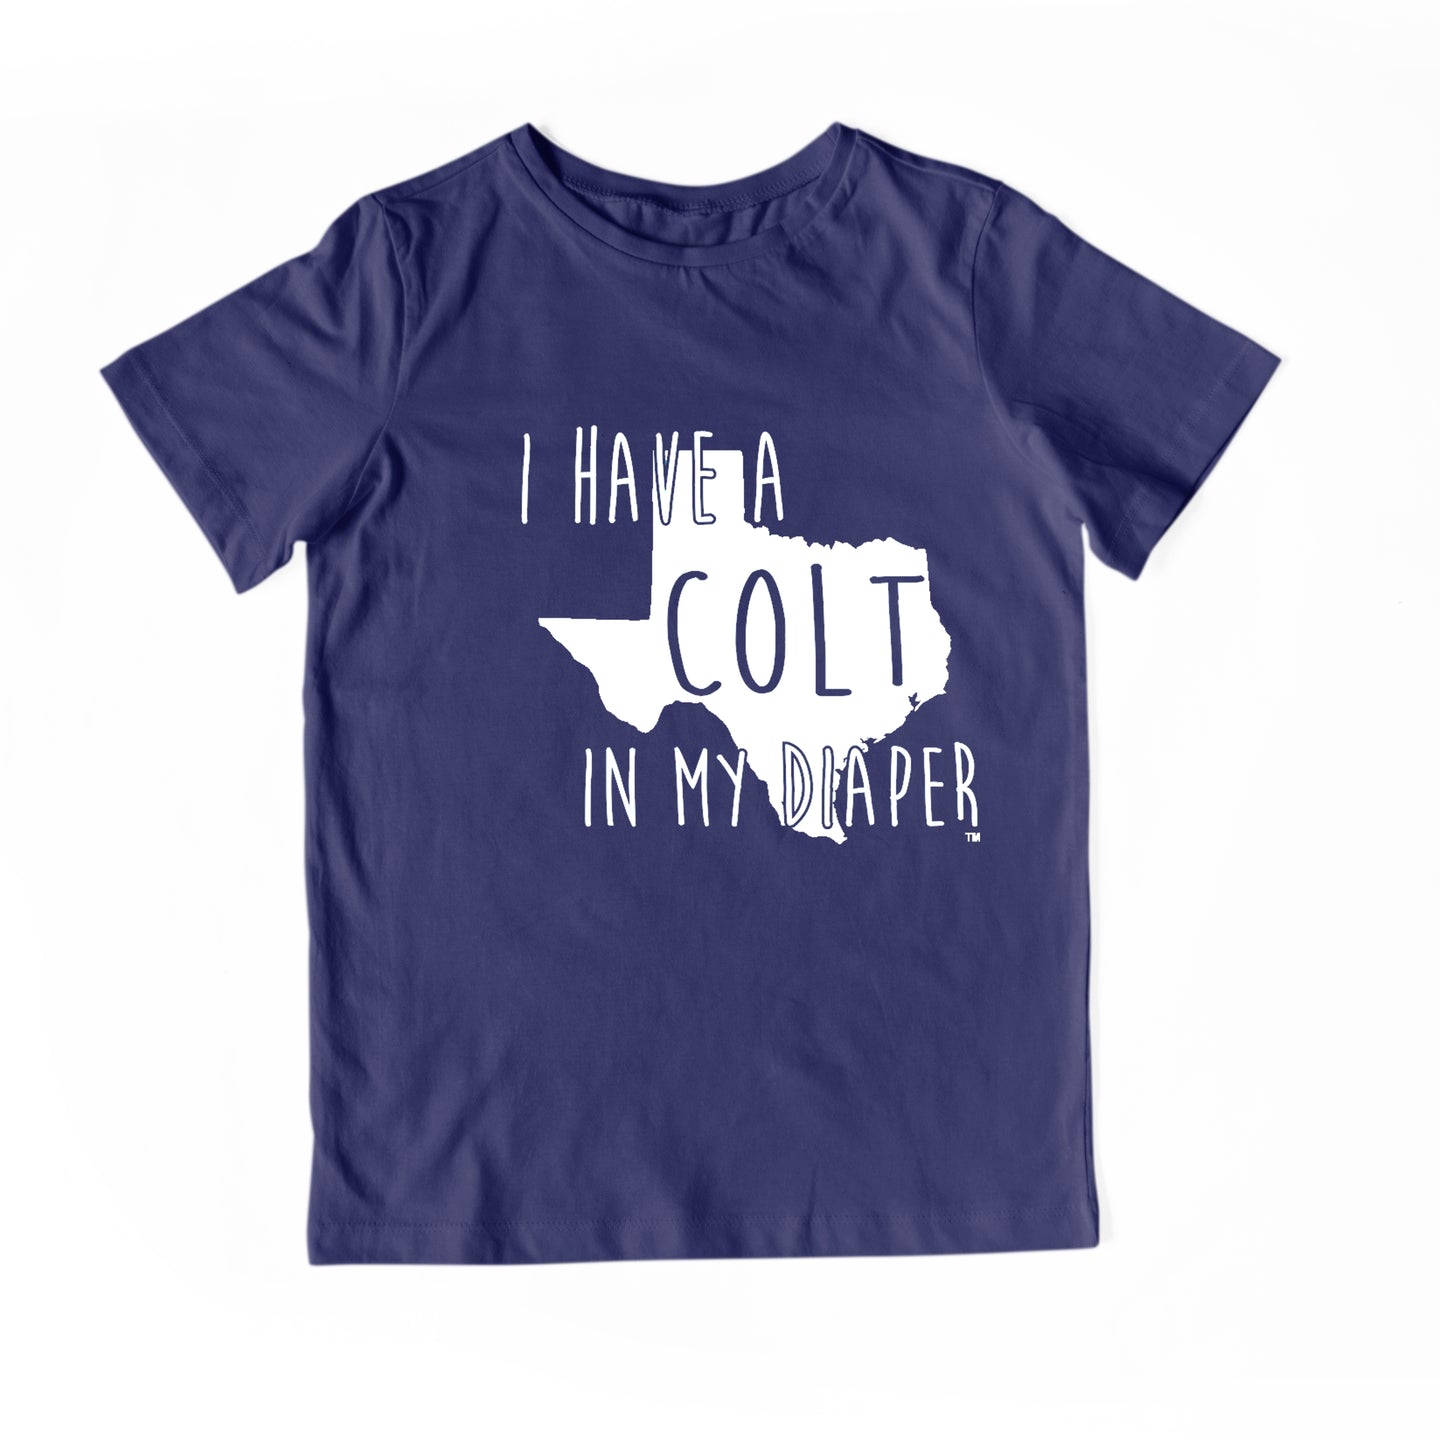 I HAVE A COLT IN MY DIAPER Child Tee